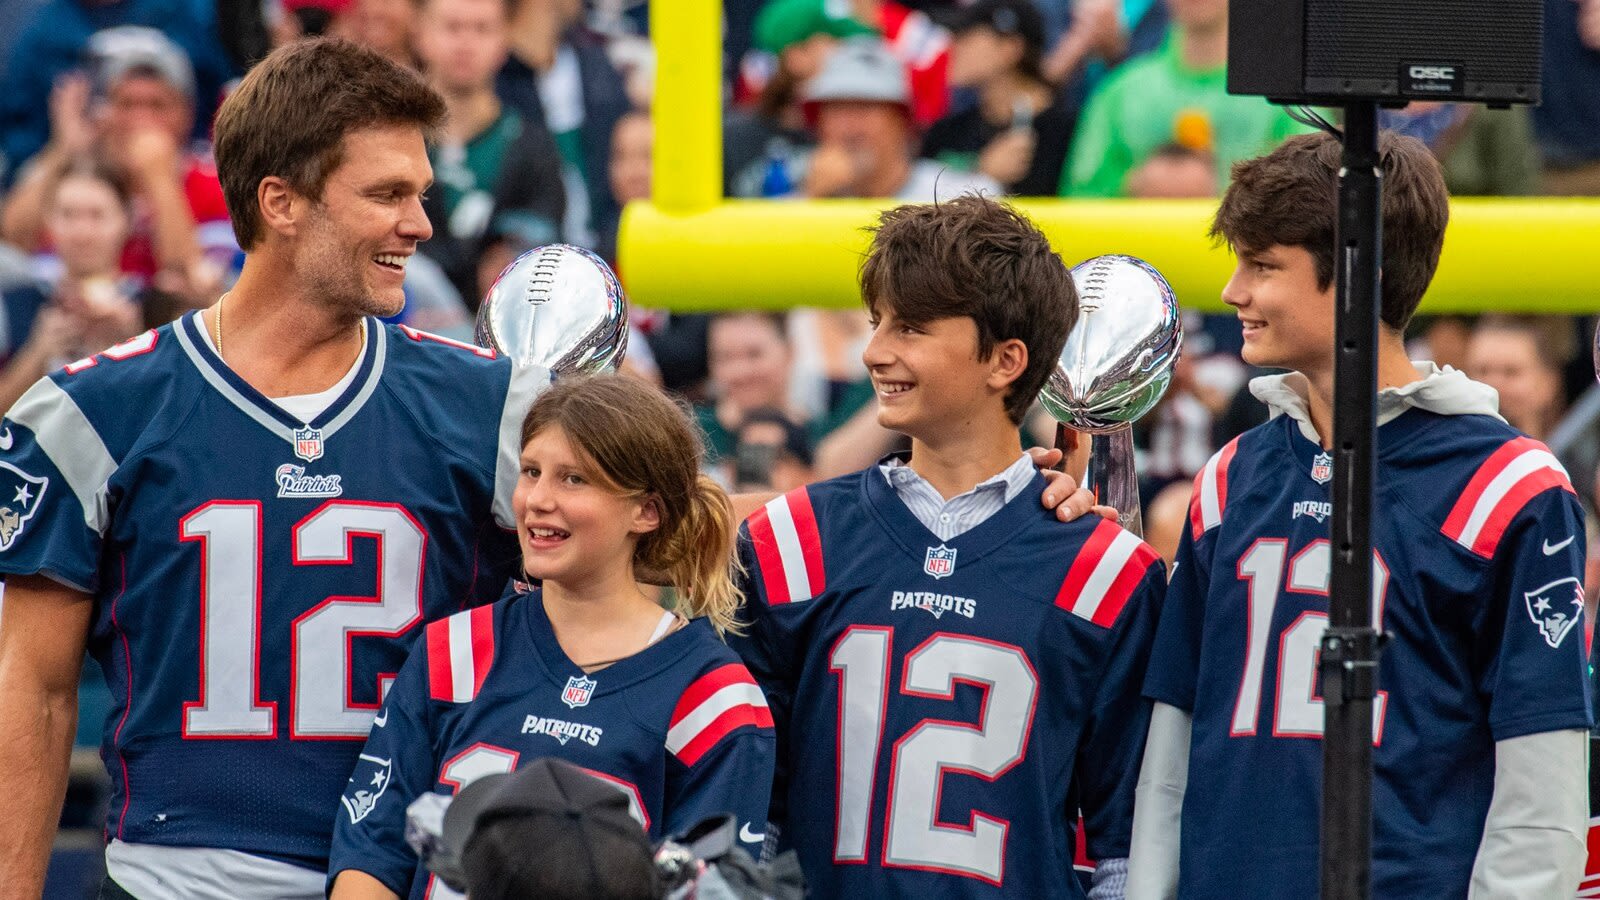 What to know about Gisele Bündchen and Tom Brady's kids